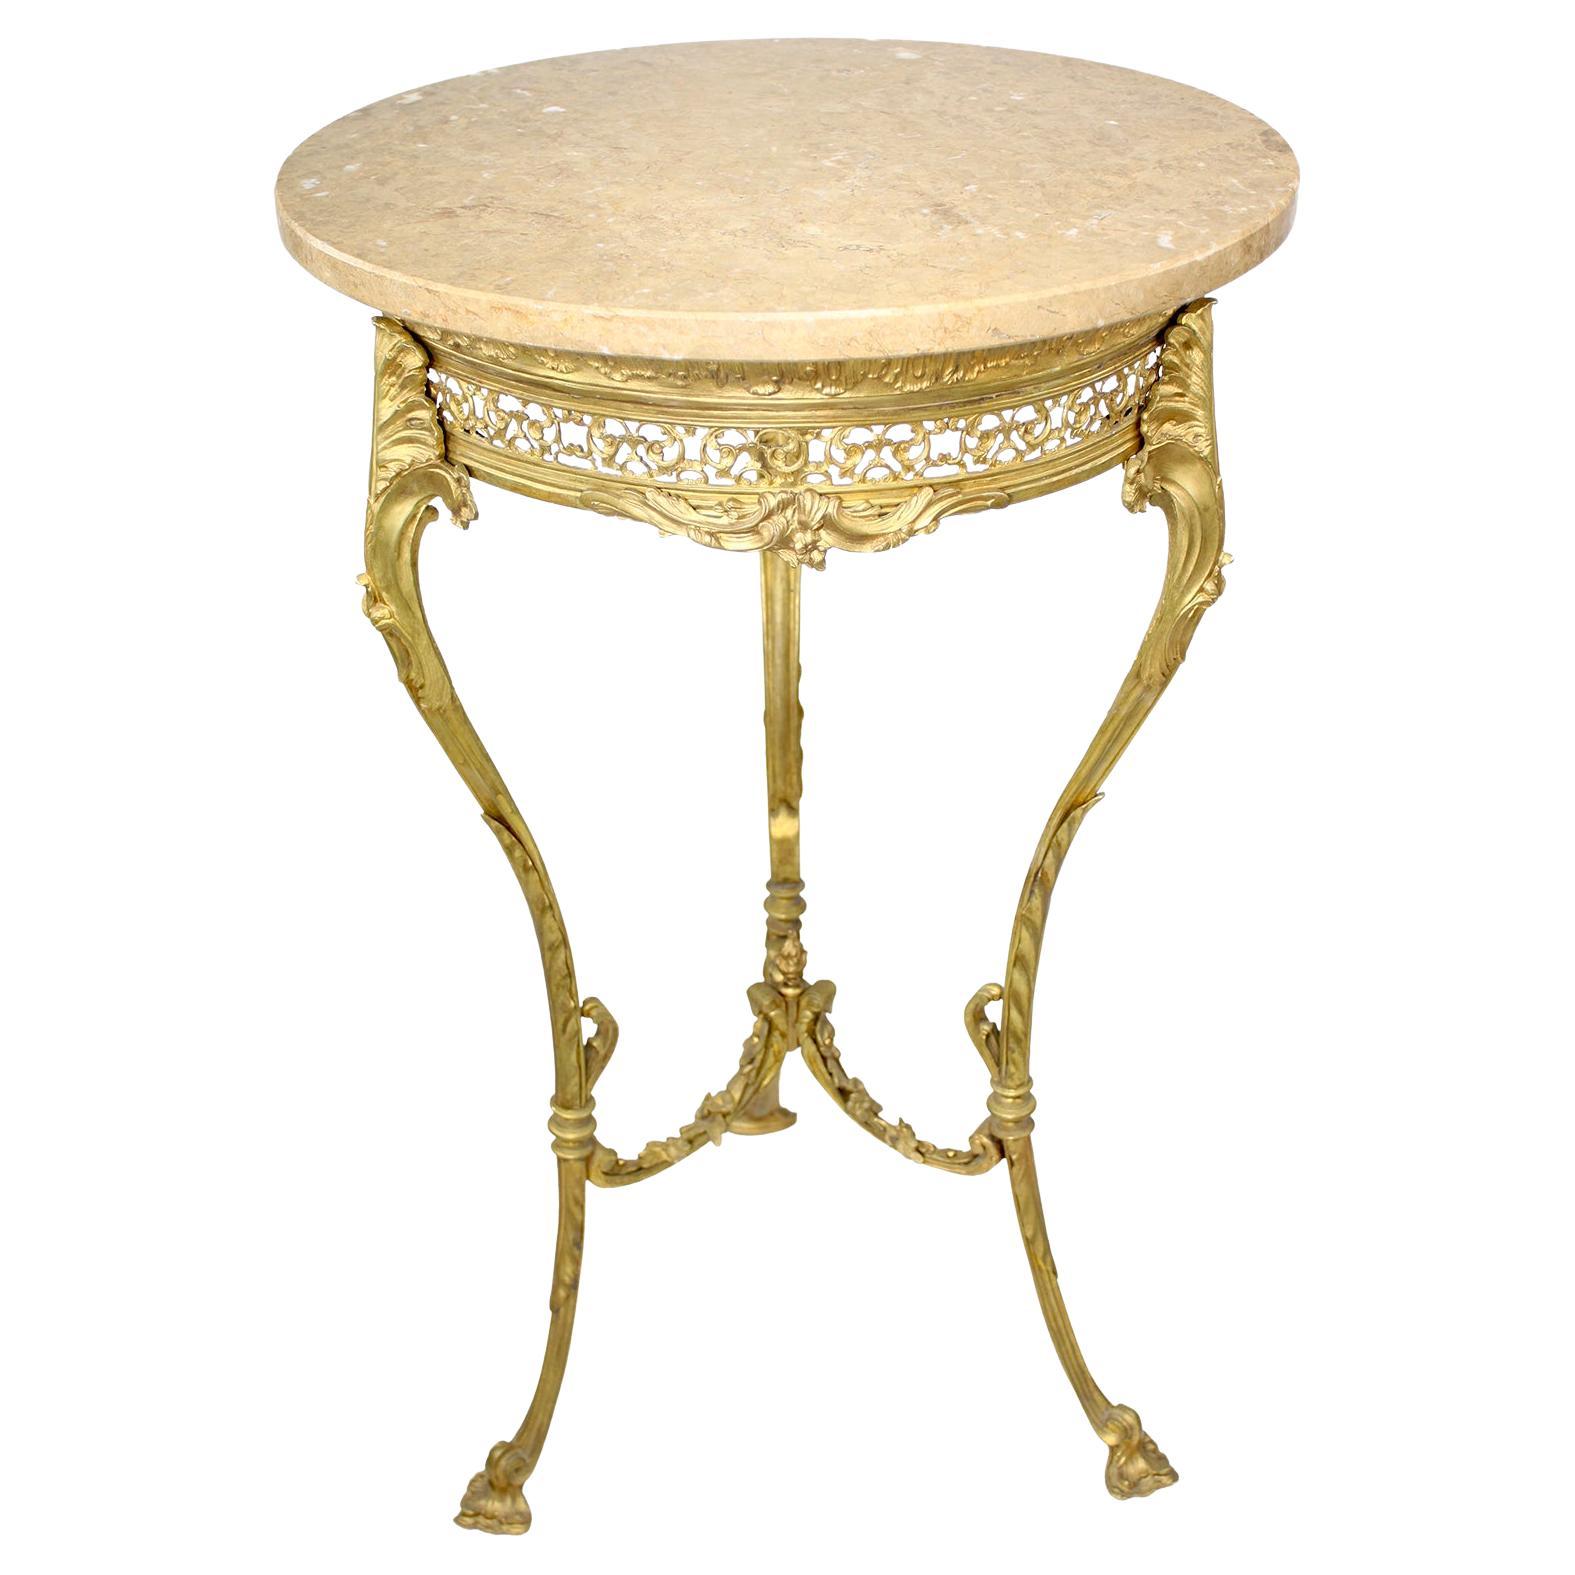 A French Belle Époque Louis XV Style Gilt-Bronze Gueridon Table with Marble Top